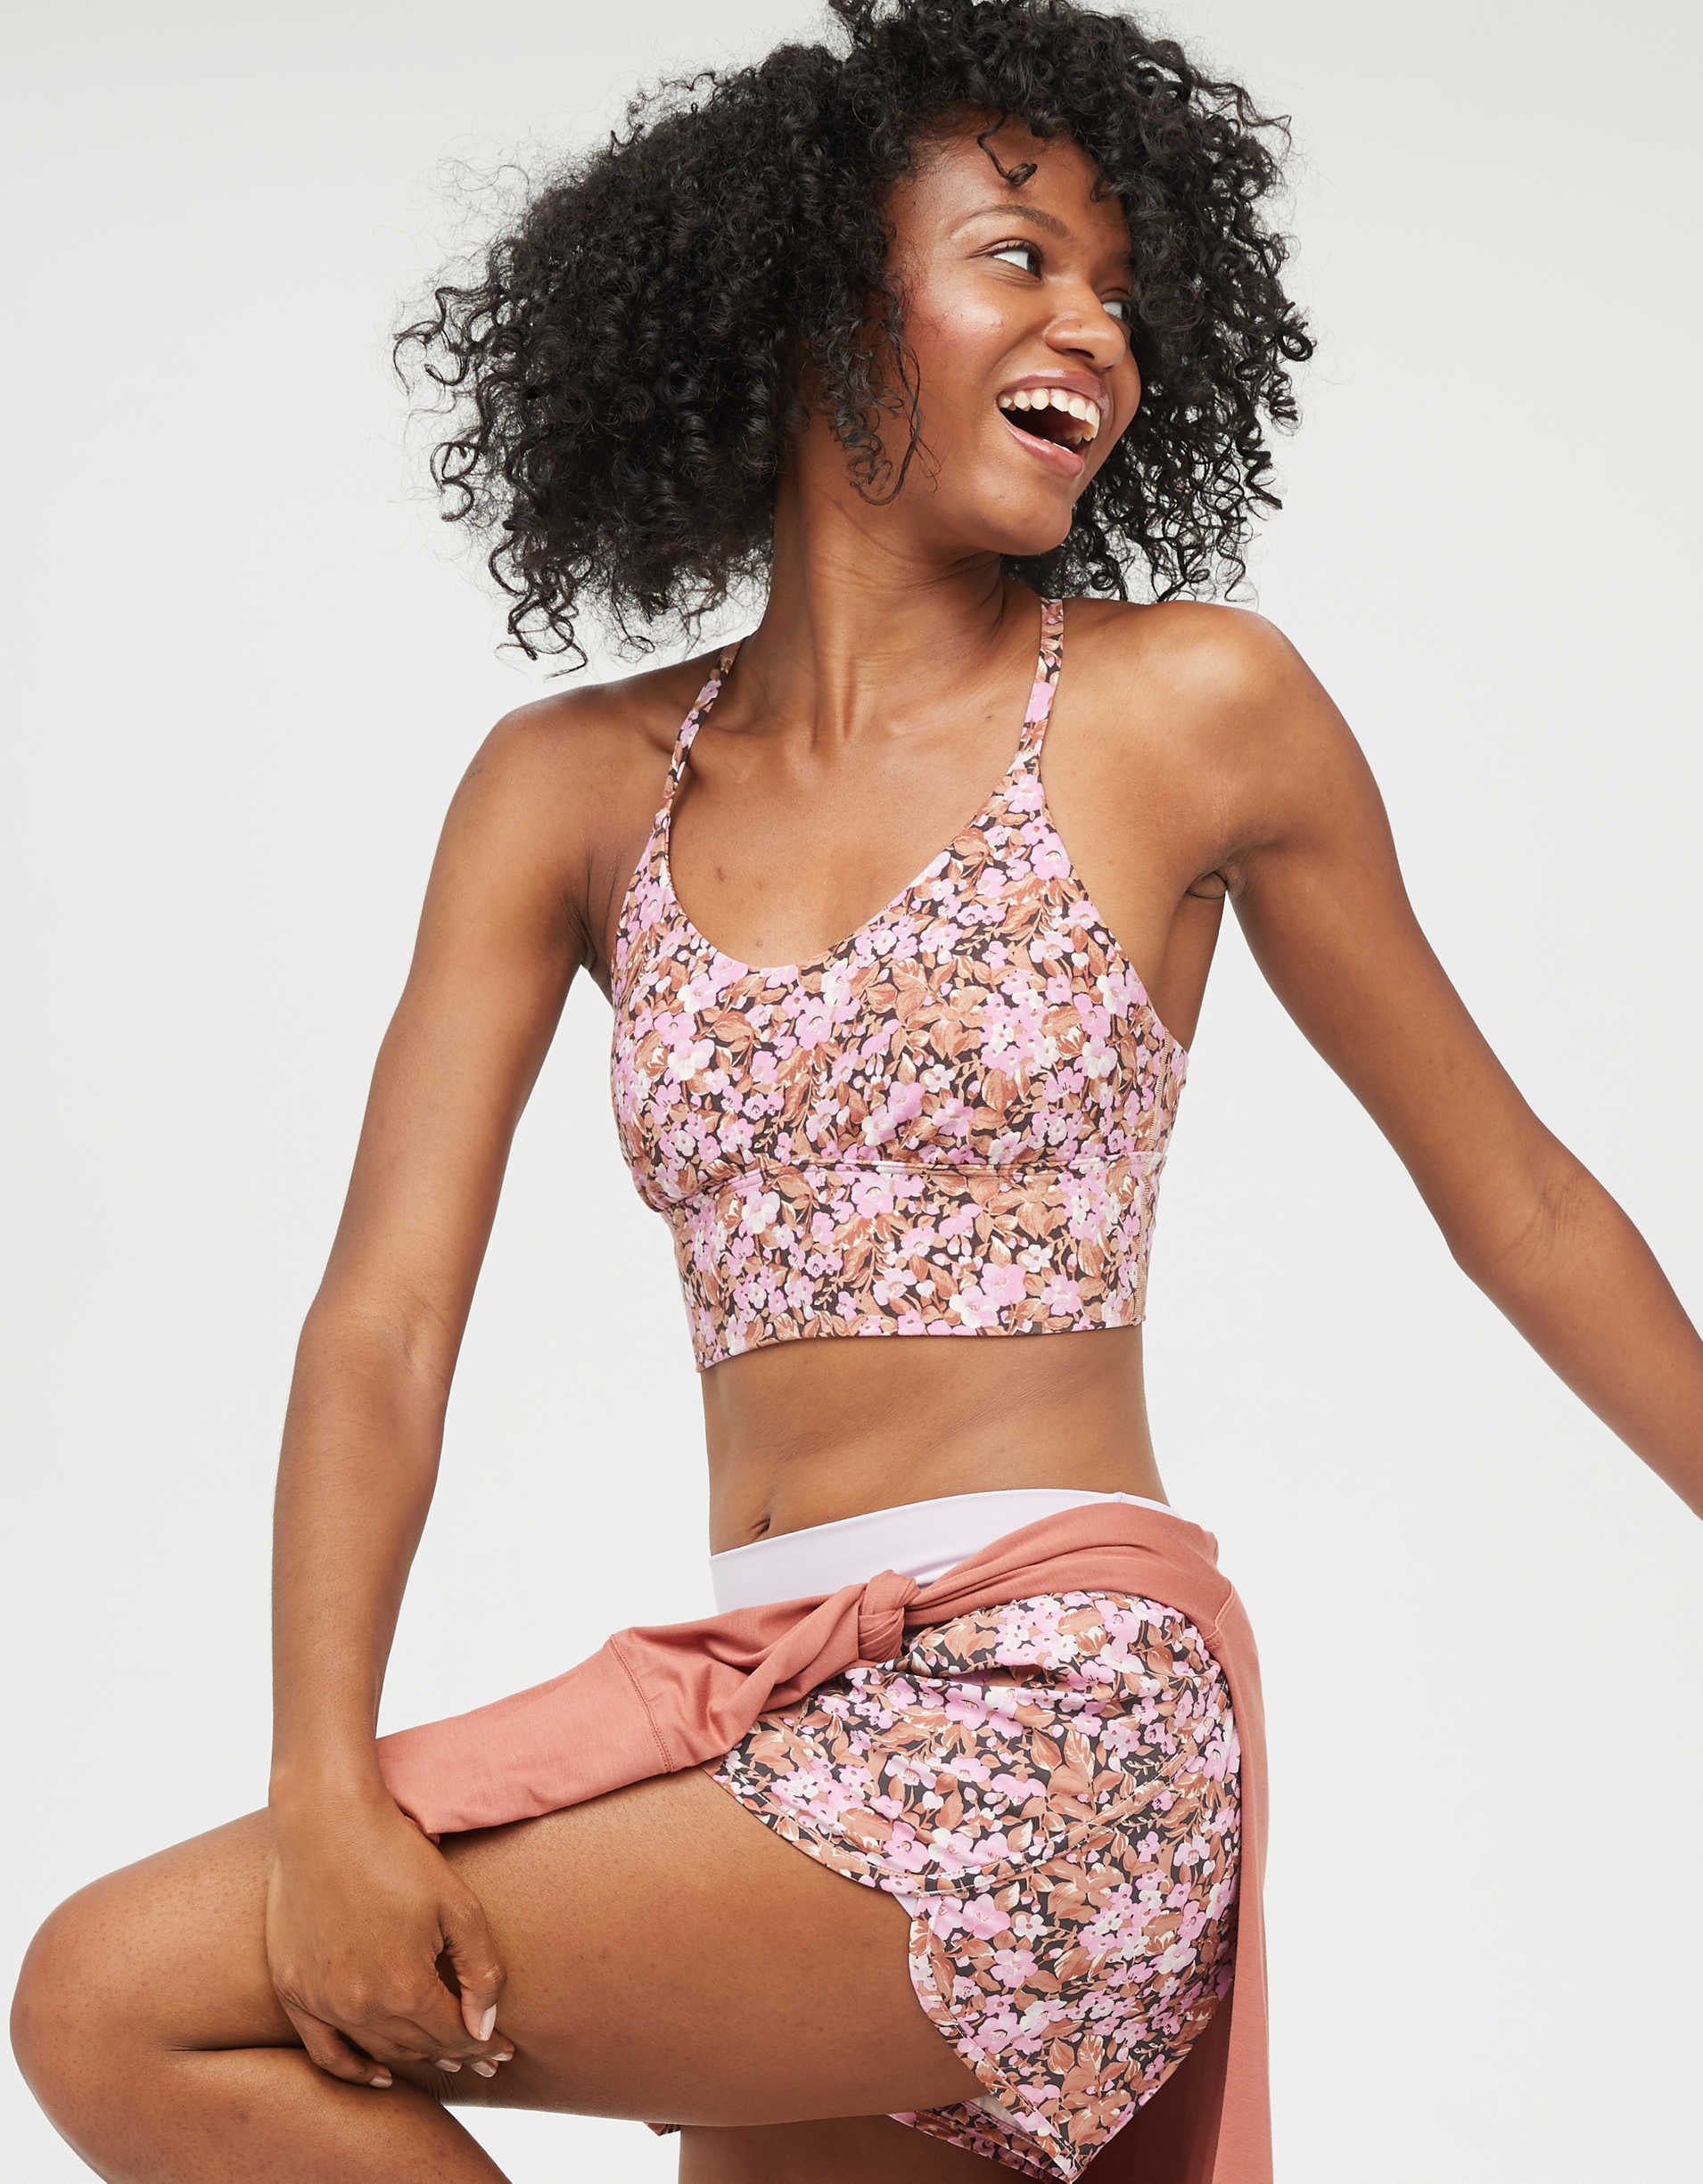 OFFLINE™ by Aerie: New Arrivals Are Here! 